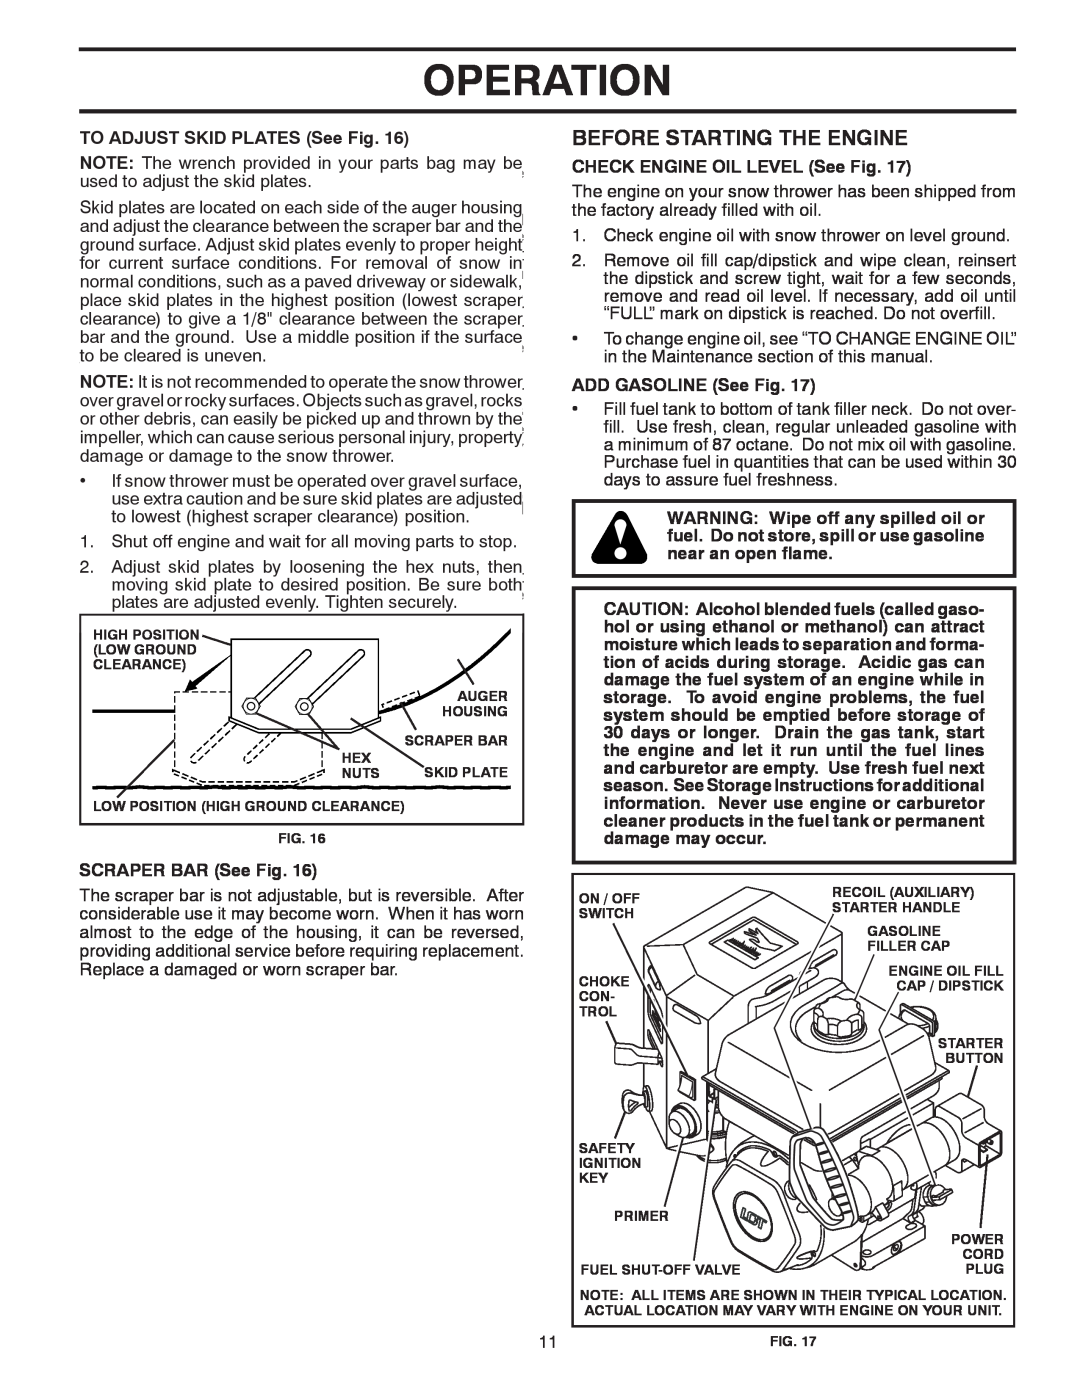 Poulan 96192004501 Before Starting The Engine, Operation, TO ADJUST SKID PLATES See Fig TO ADJUST SKID PLATES See Fig 